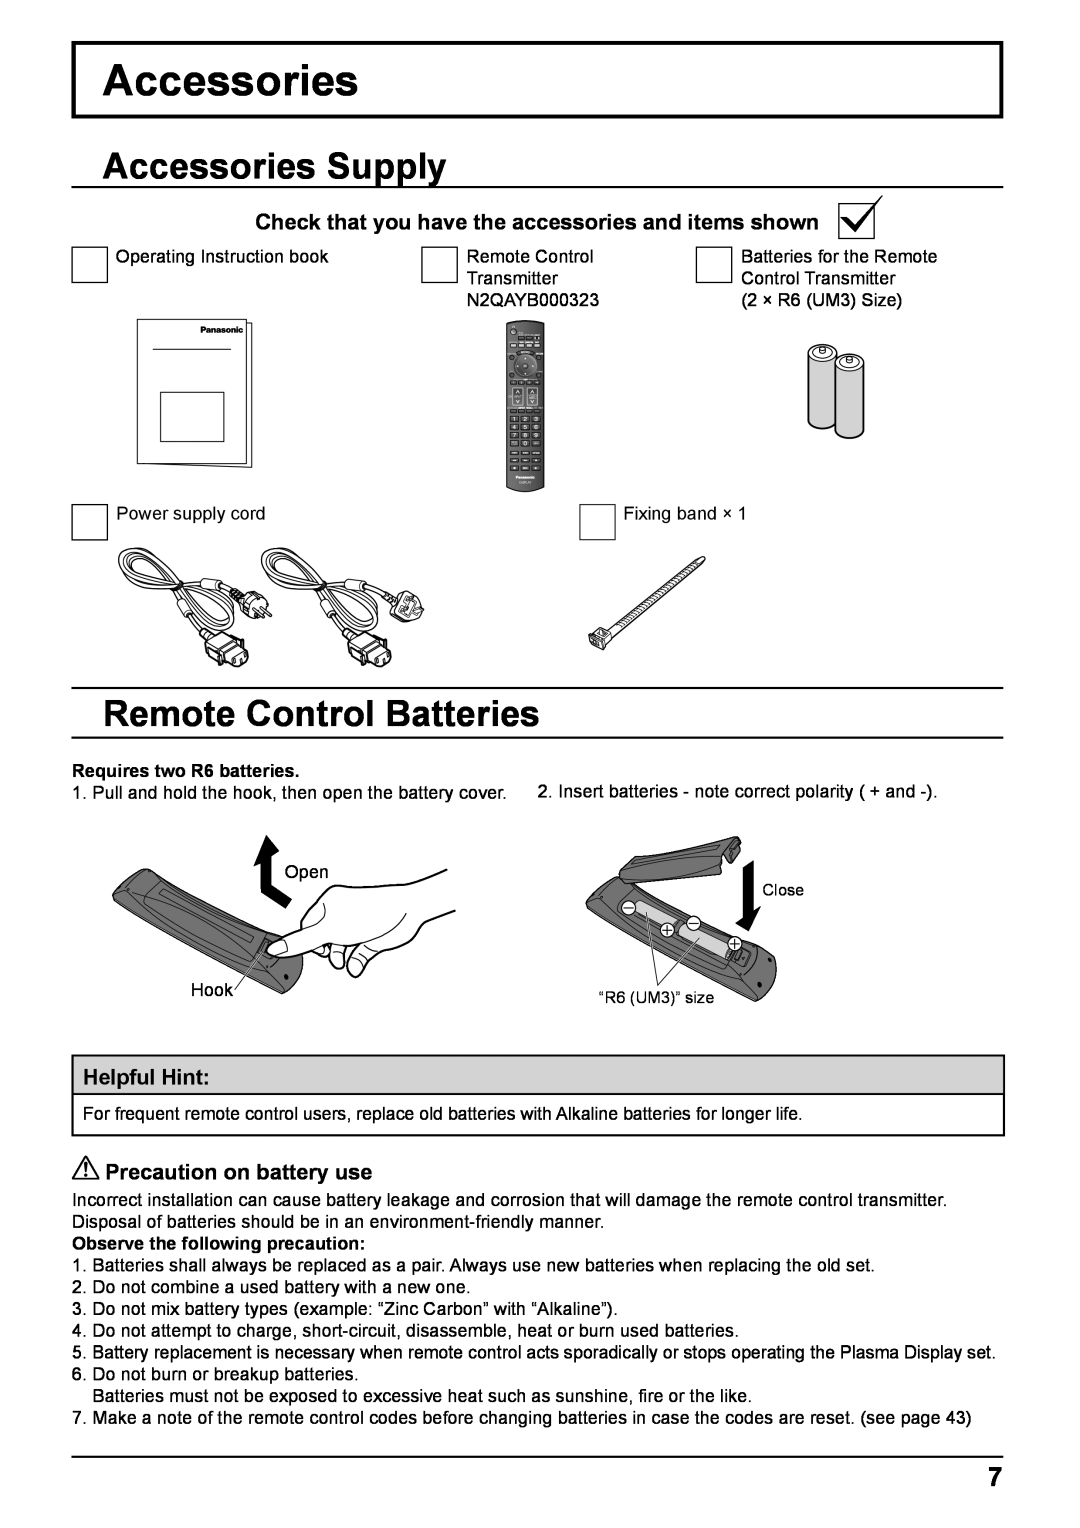 Panasonic TH-50VX100E Accessories Supply, Remote Control Batteries, Helpful Hint, Precaution on battery use 